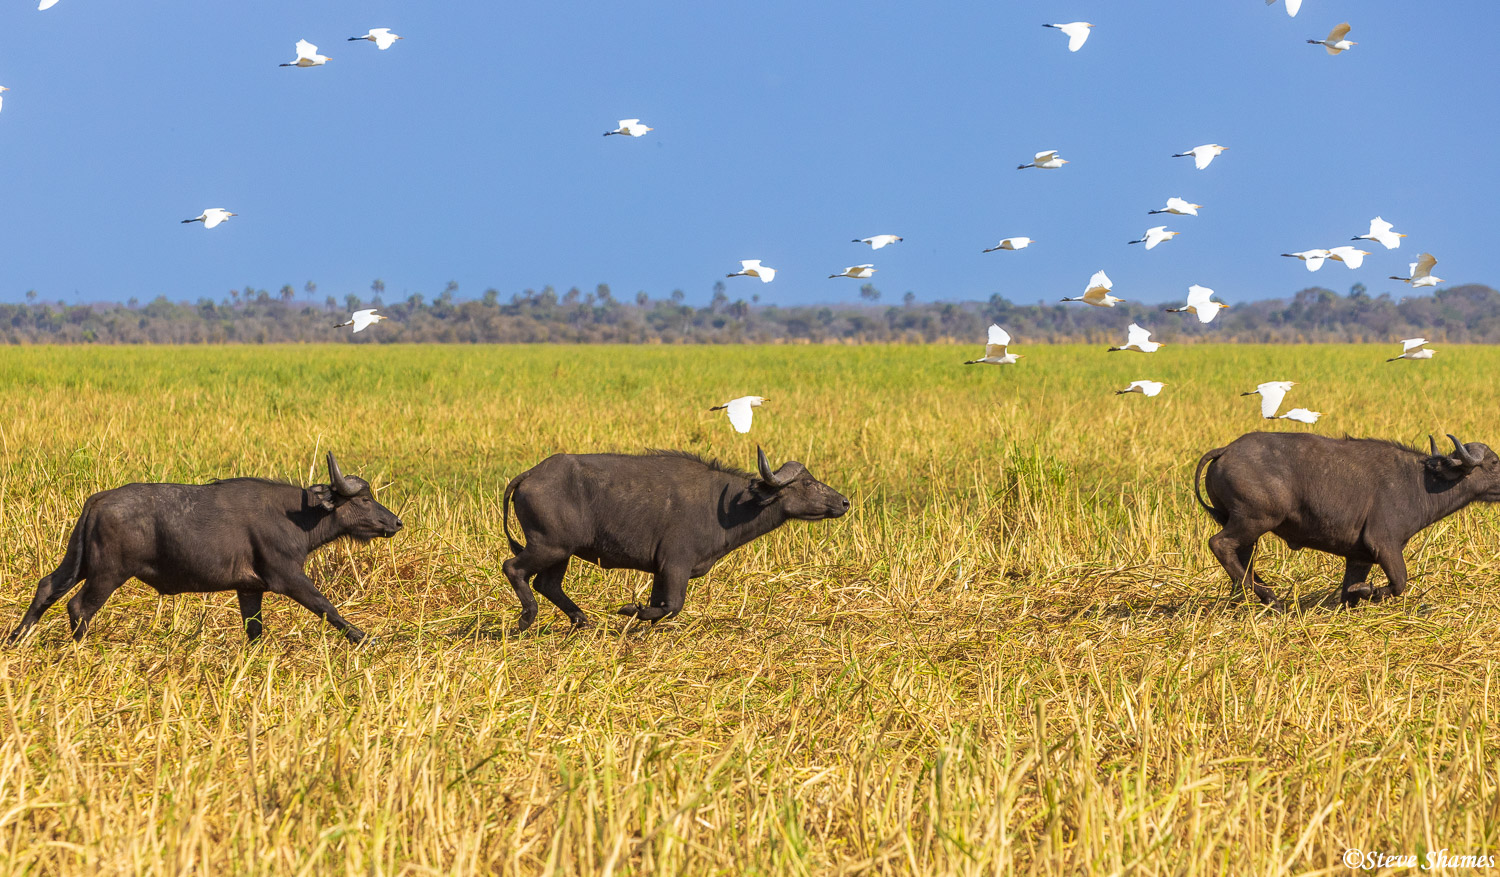 Running buffalo, with a flock of birds keeping pace with them.